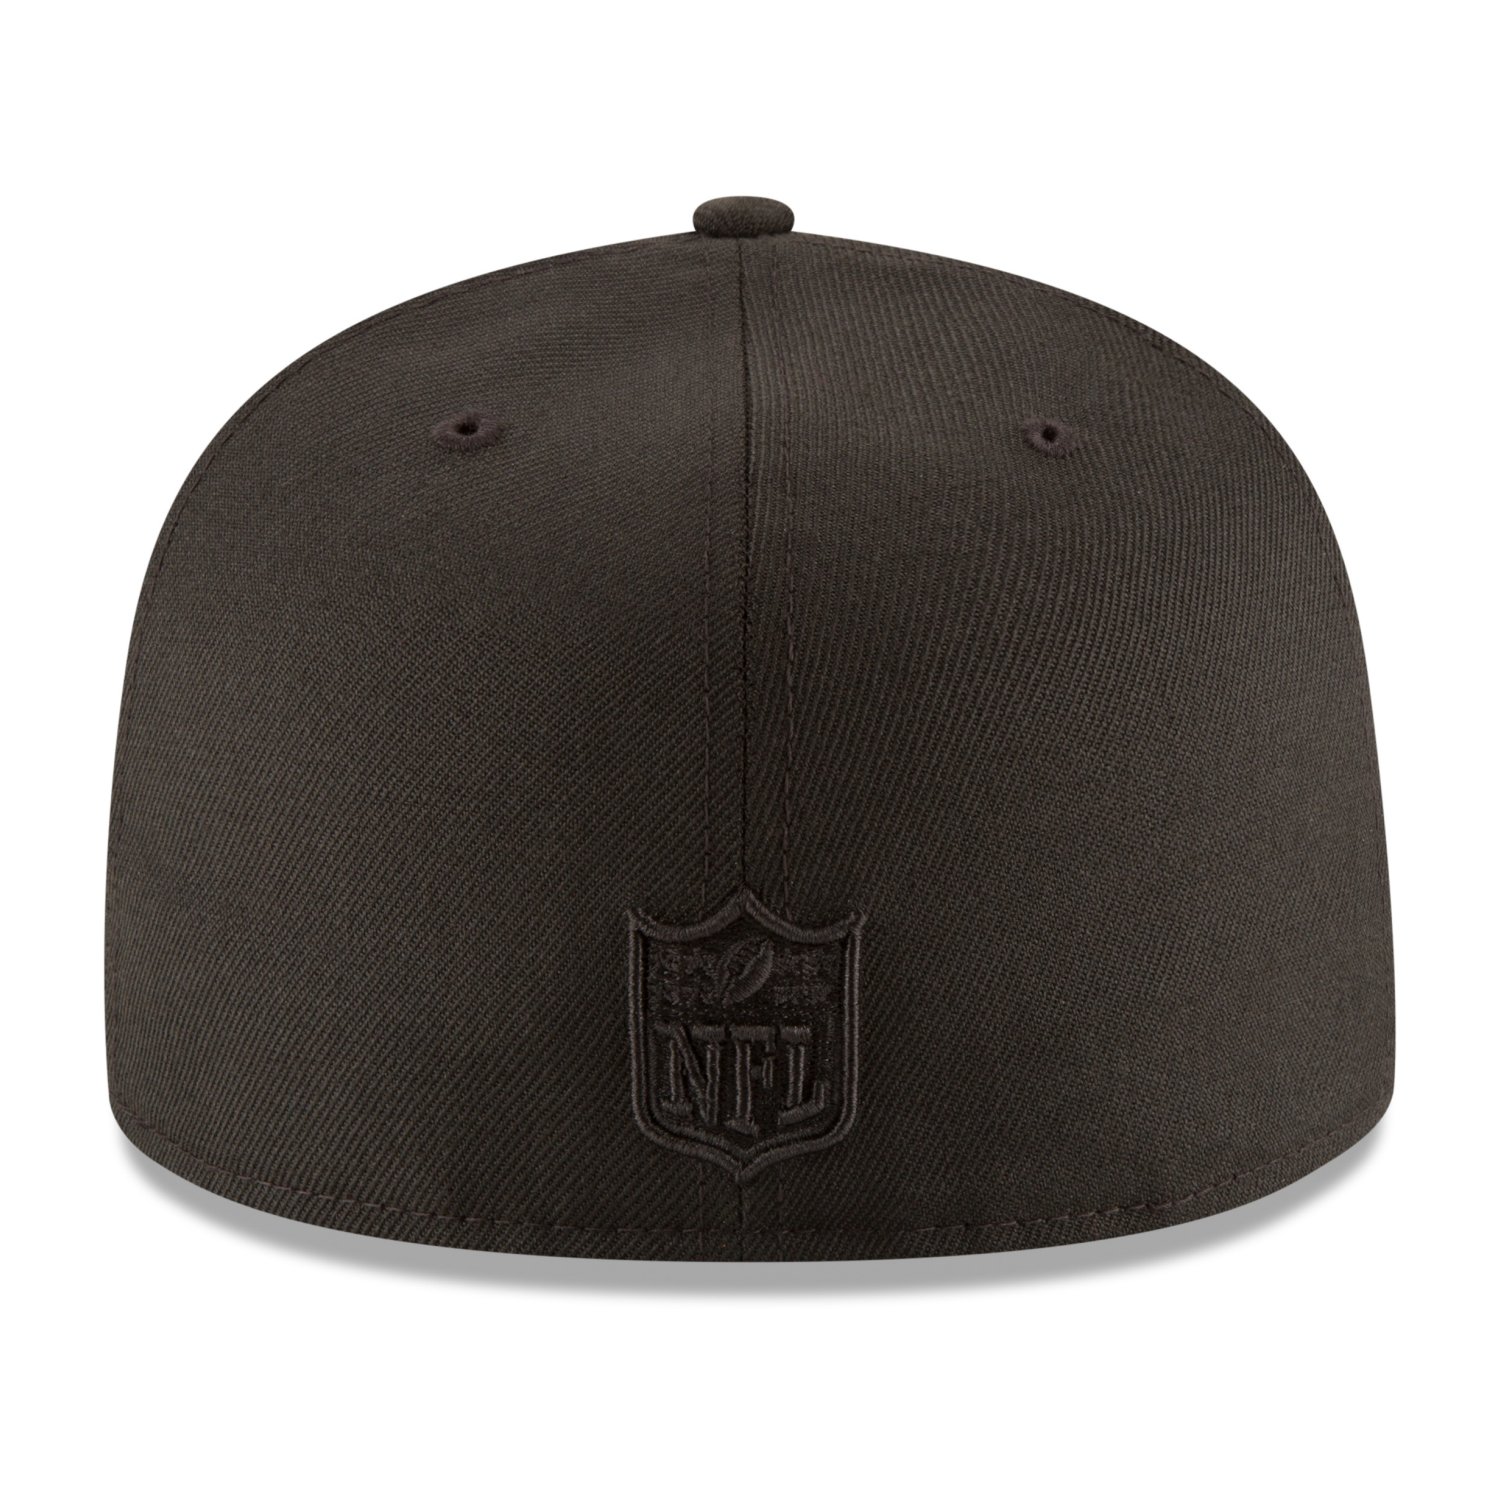 New Era 59Fifty Cap - NFL BLACK Cleveland Browns | Fitted | Caps ...